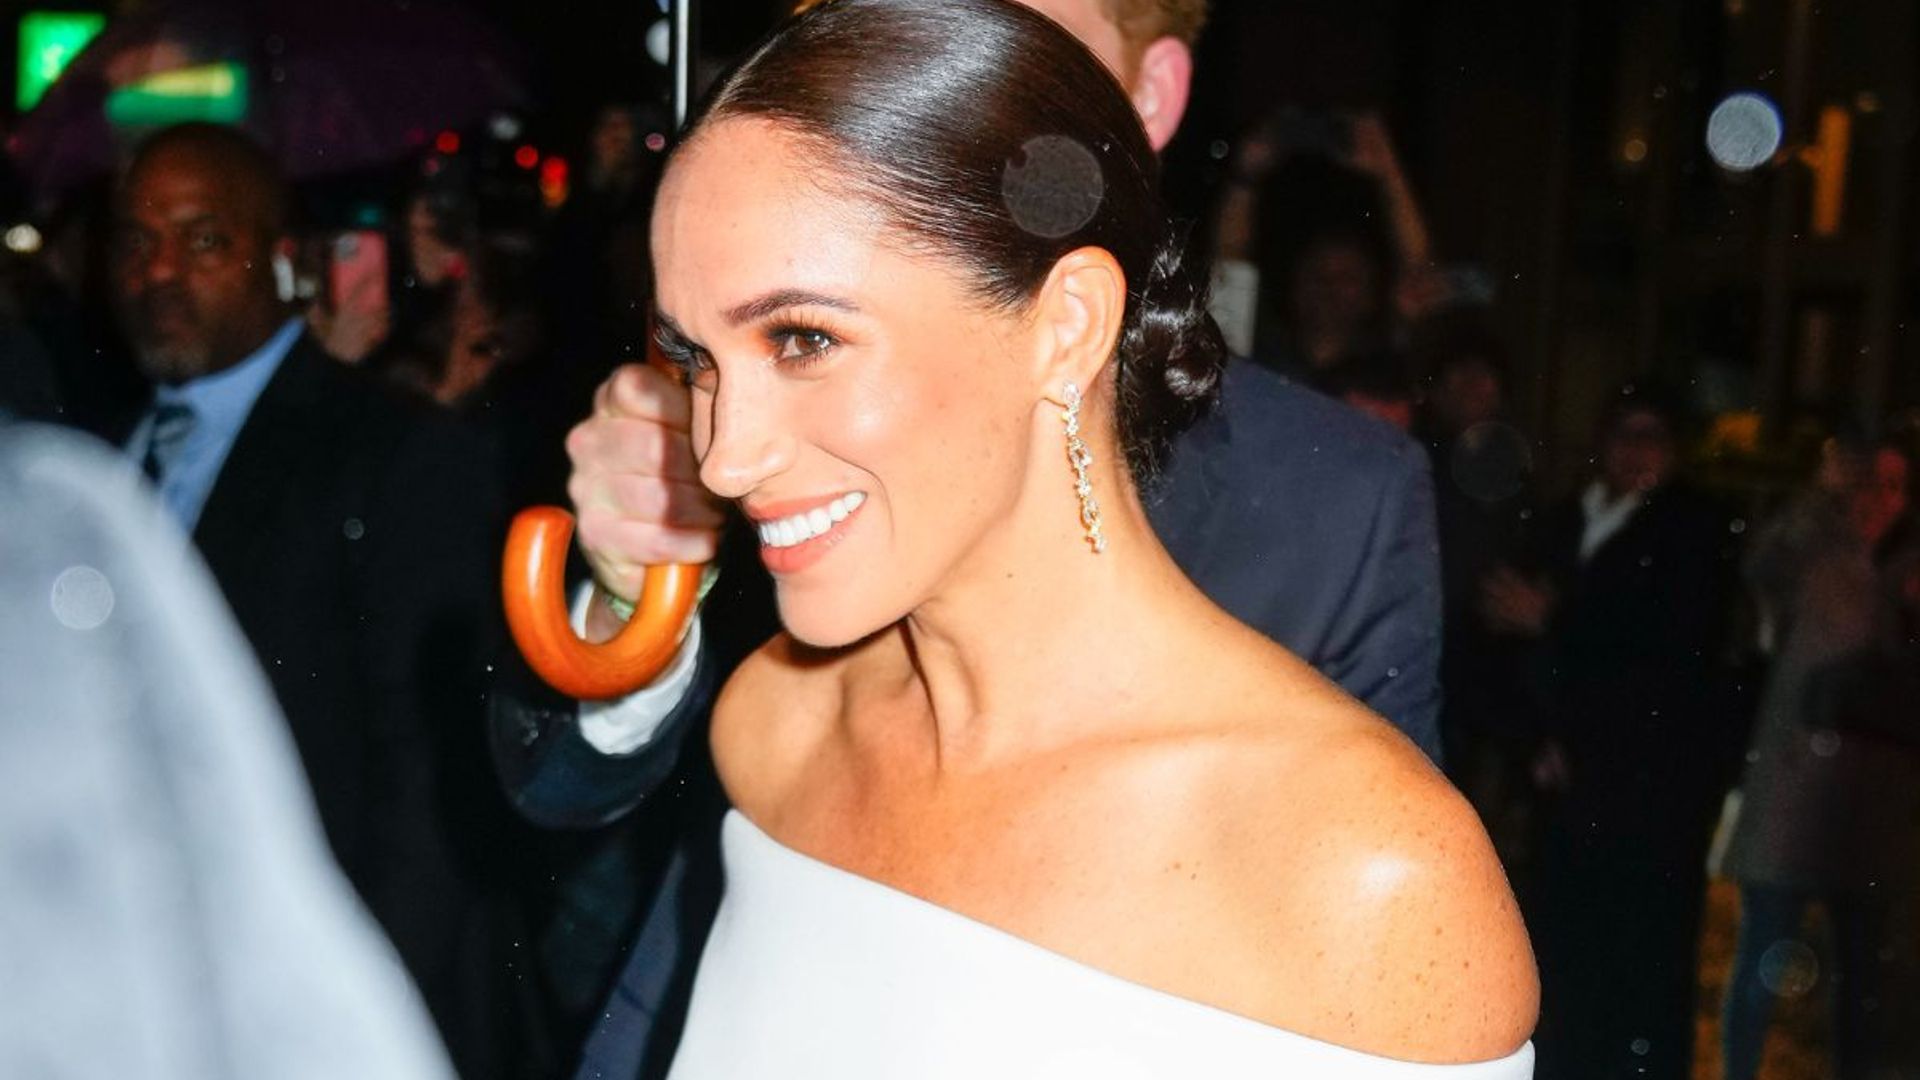 Meghan Markle's White Louis Vuitton Gown Speaks to Her Style Strengths